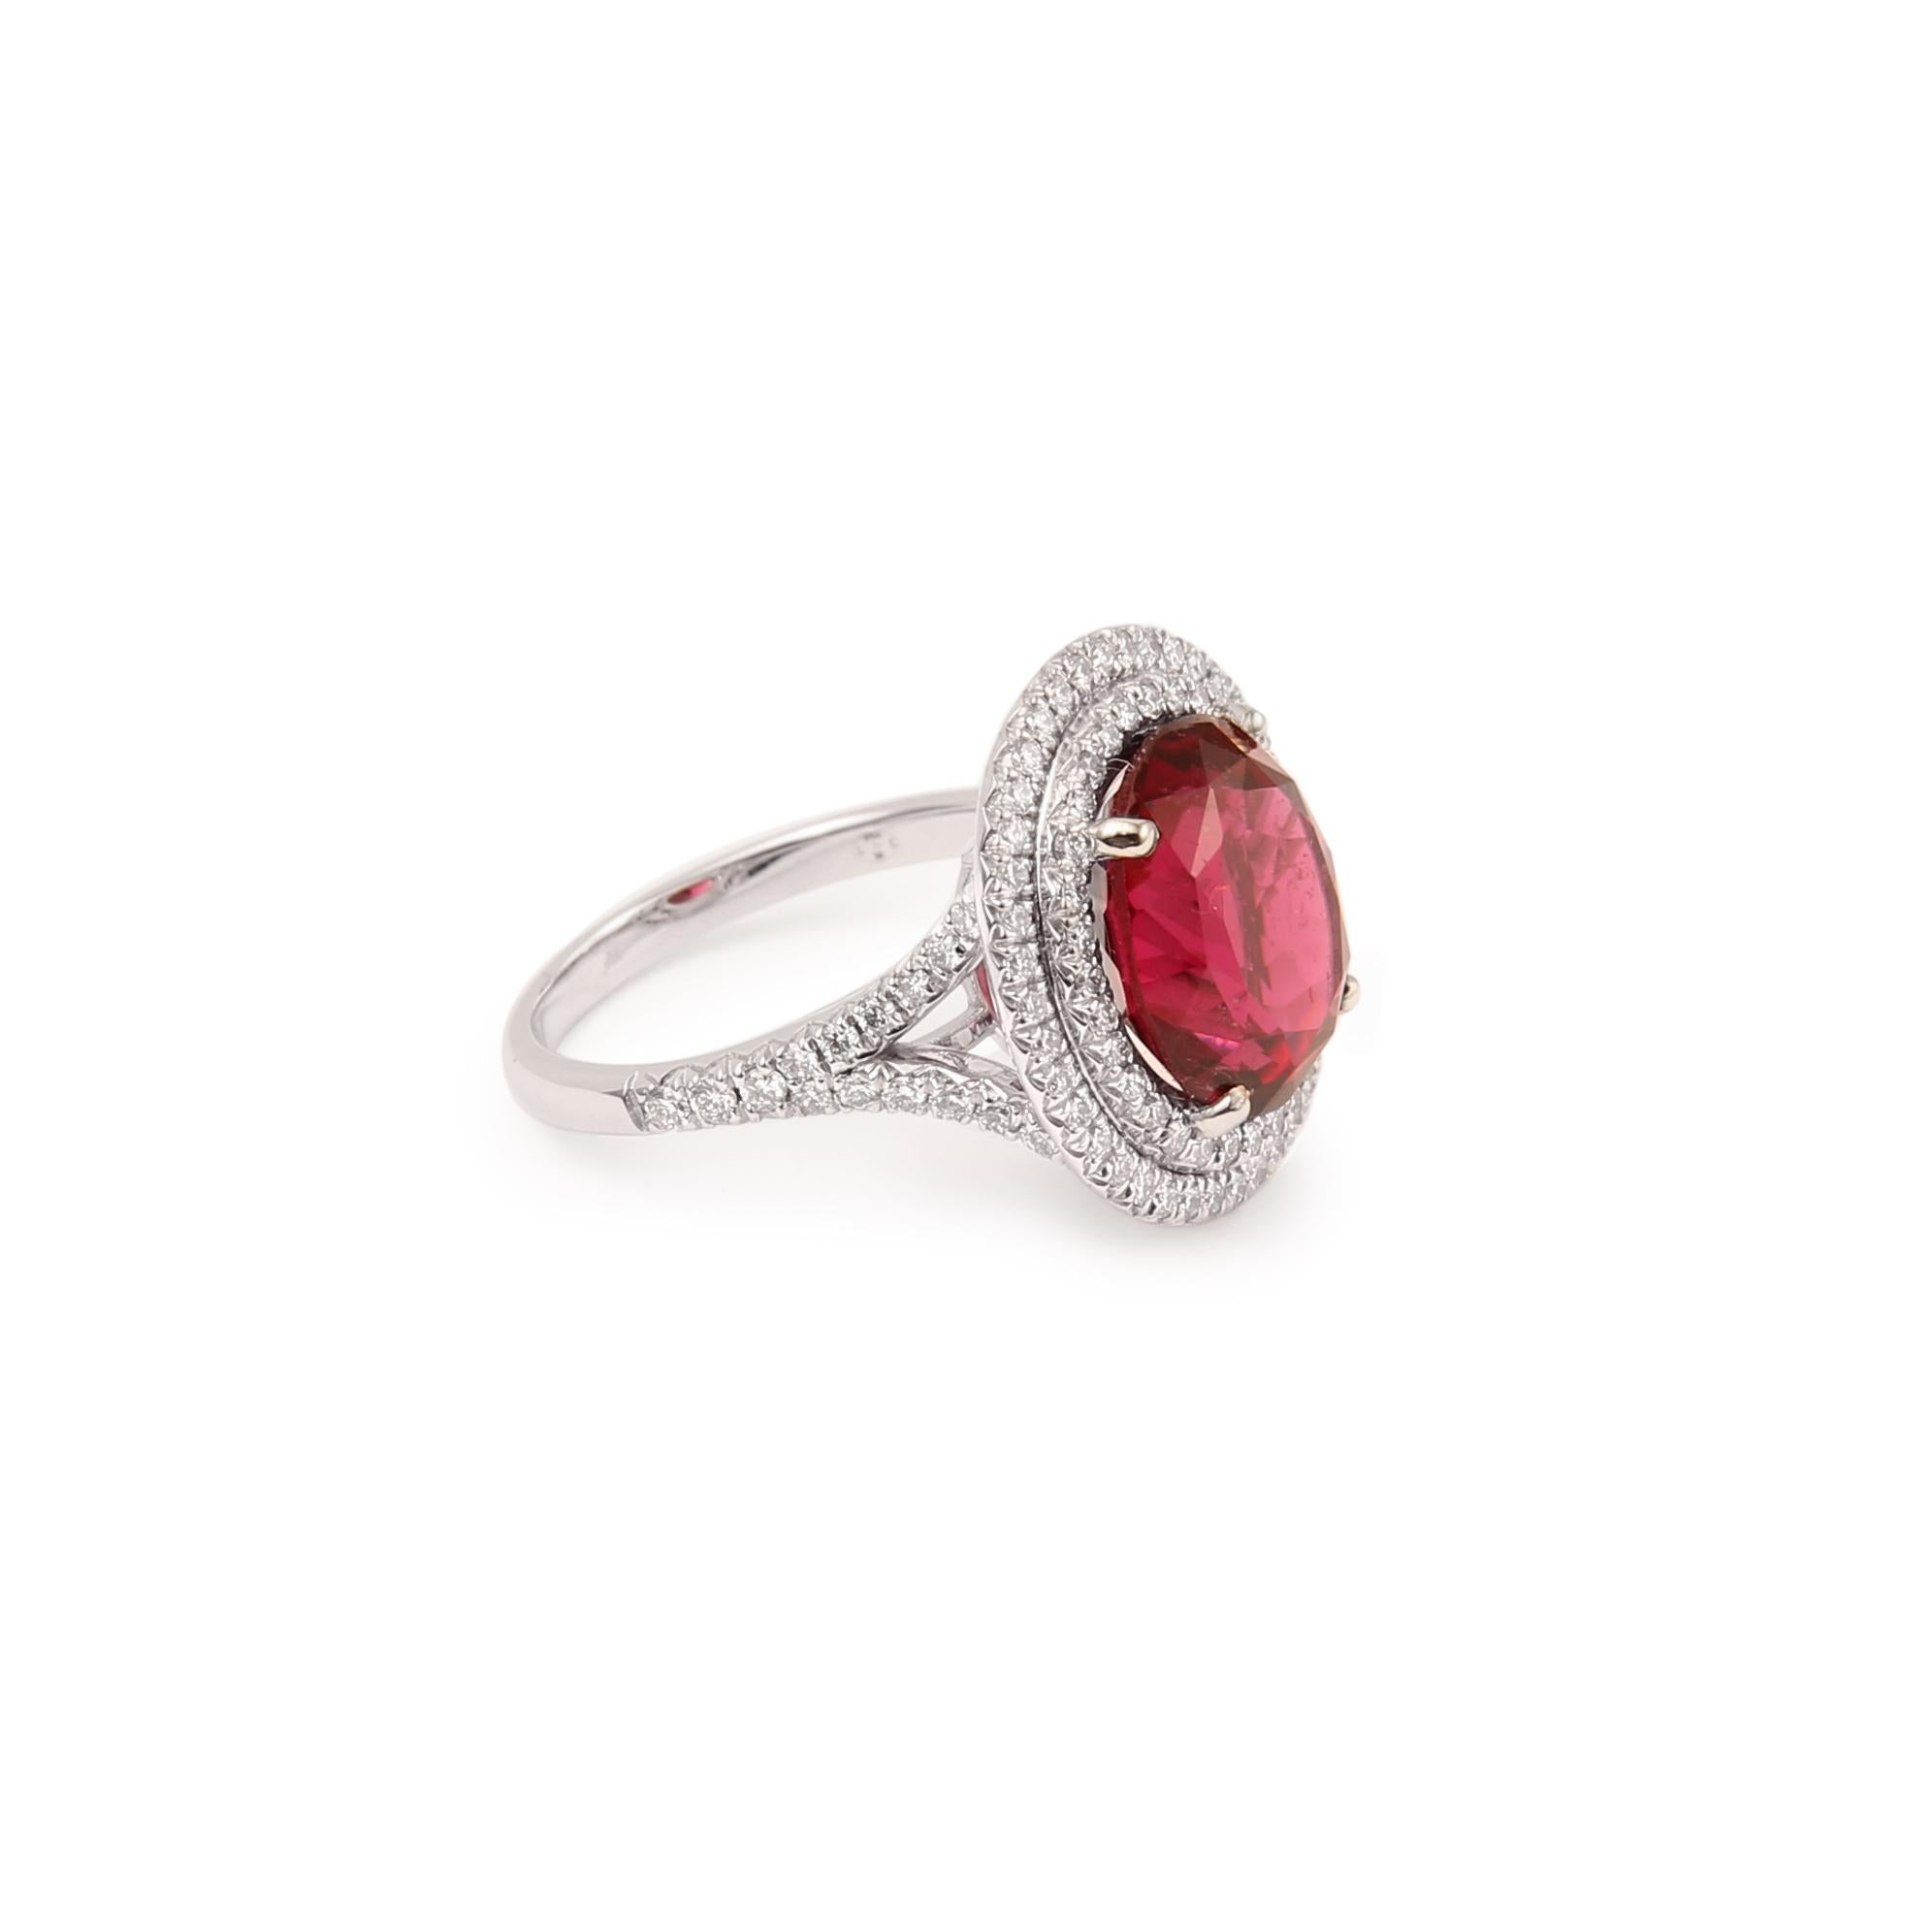 Beautiful modern pompadour in white gold set with a large rubellite and a diamond paving.

Rubellite weight: 5.71 carats

Rubellite size: 12.0 x 10.5 x 6.7 mm (0.47 x 0.39 x 0.24 inch)

Total weight of the diamonds: 0.71 carats

Ring's dimensions :